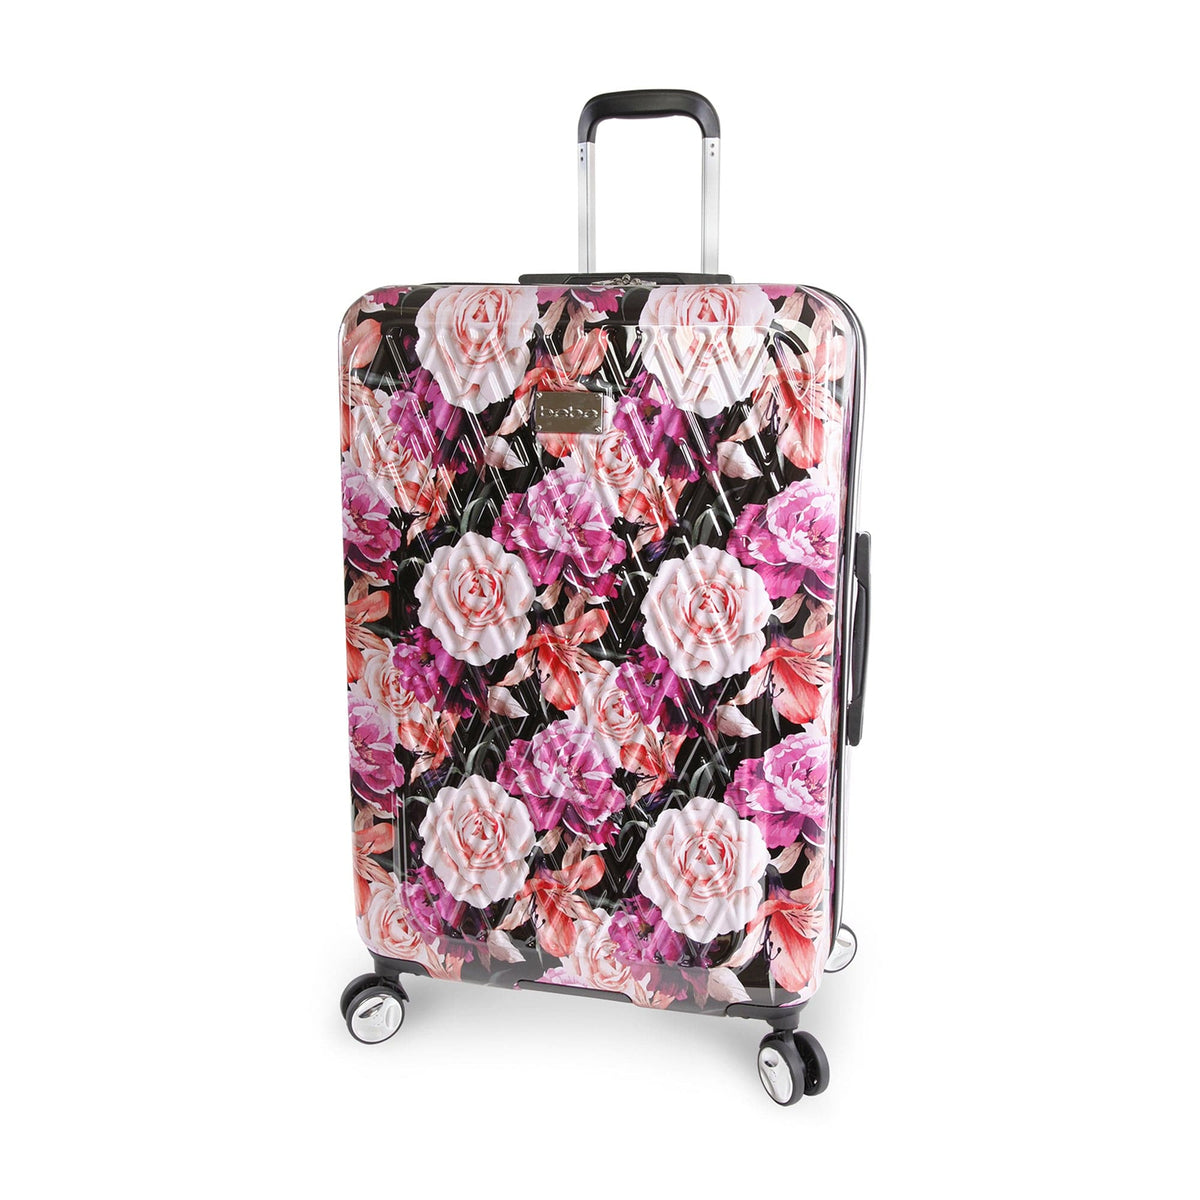 Bebe Marie 29" Hardside Spinner Checked Luggage